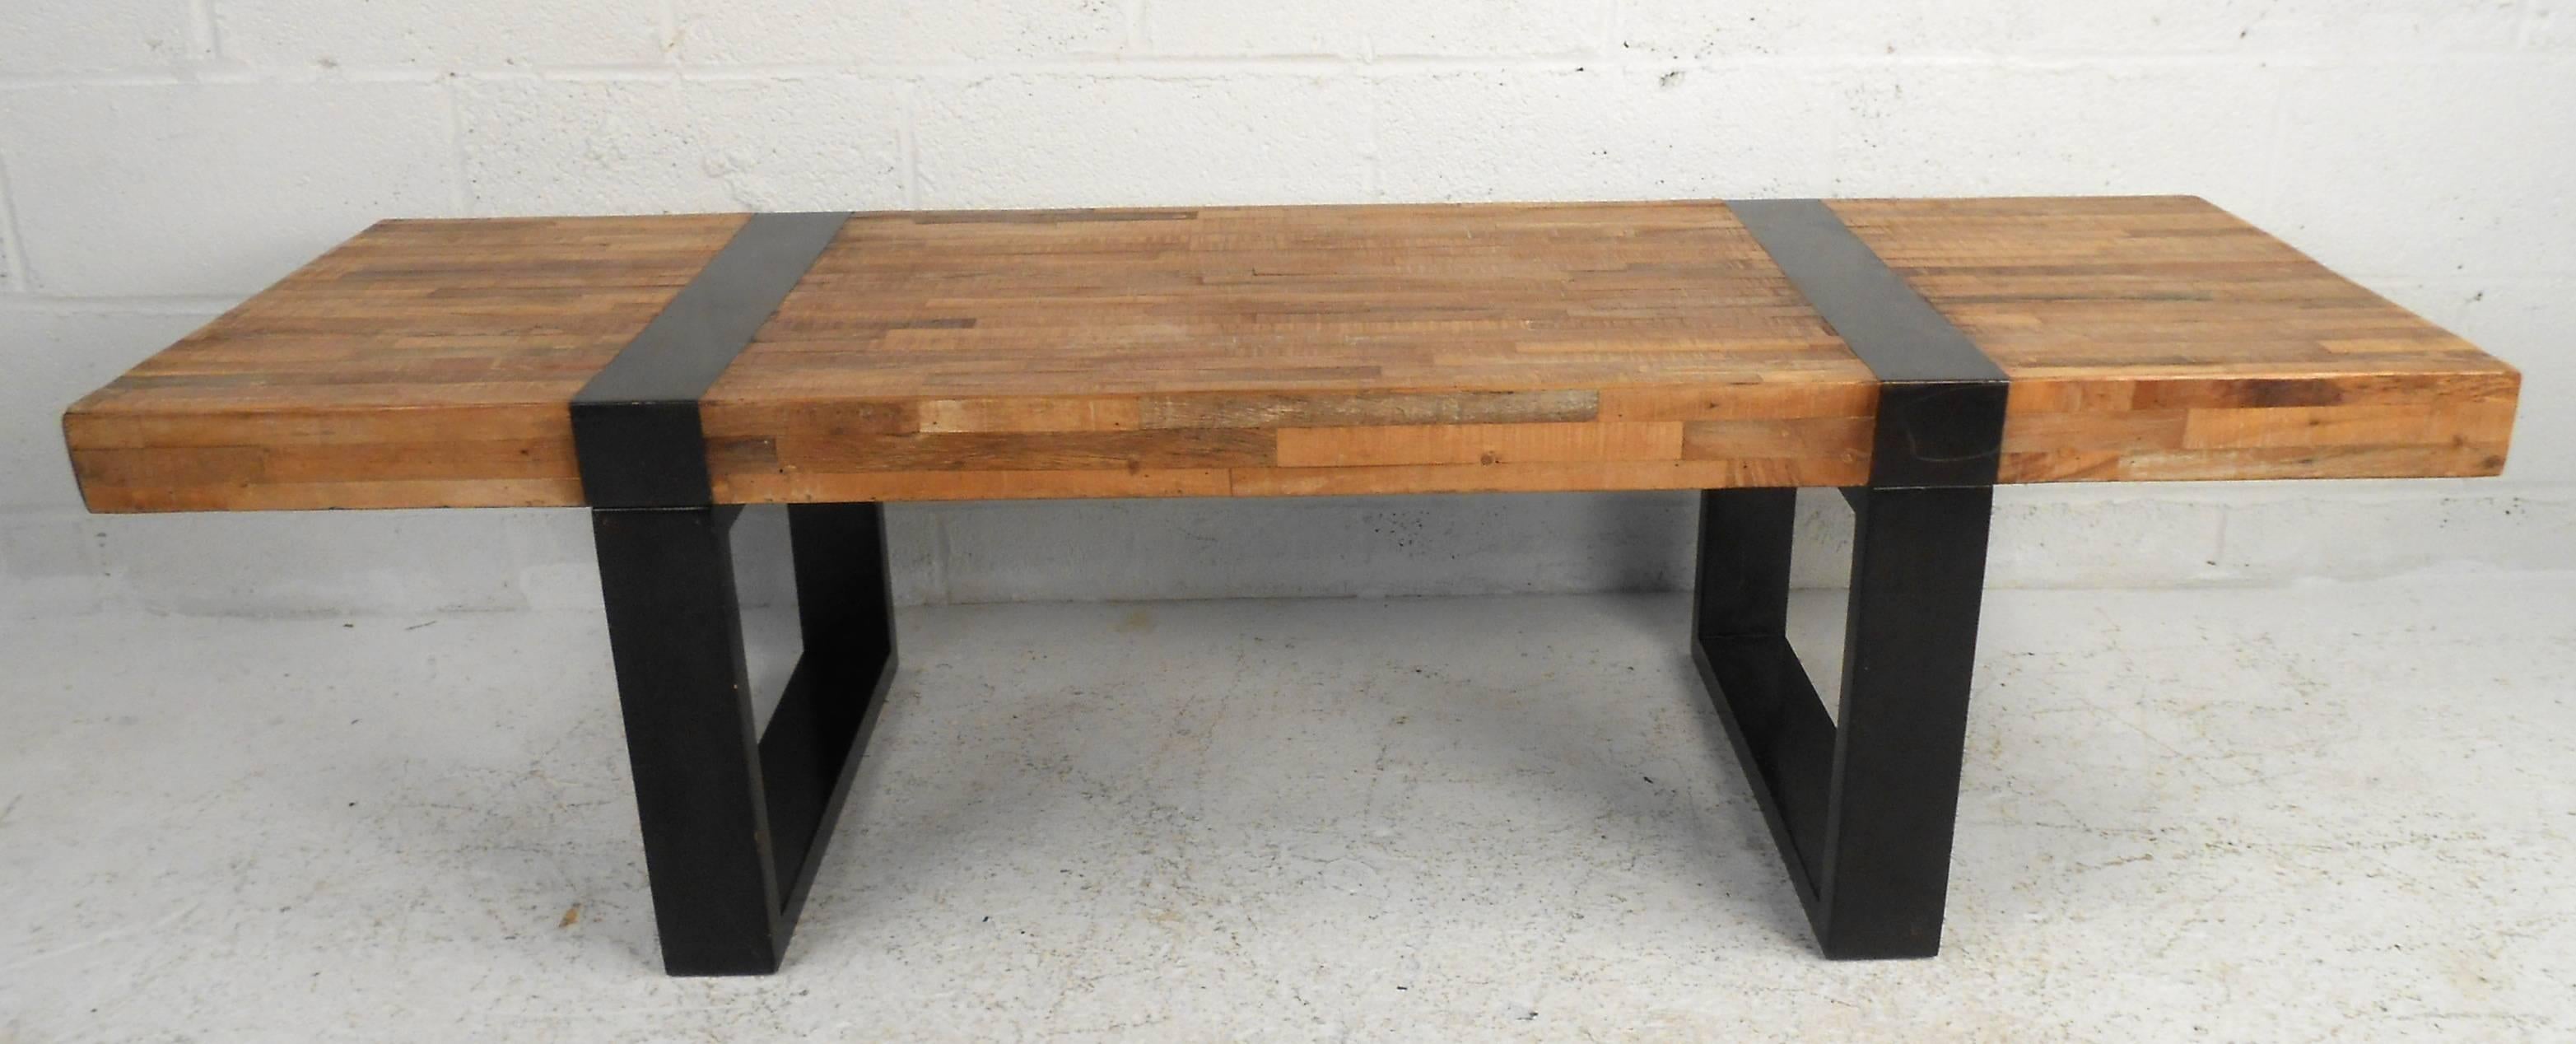 This beautiful Industrial coffee table makes the perfect eye-catching addition to any modern interior. This sturdy Milo Baughman style coffee table features sled legs and a rustic appearance. This gorgeous table looks amazing as the centre piece in